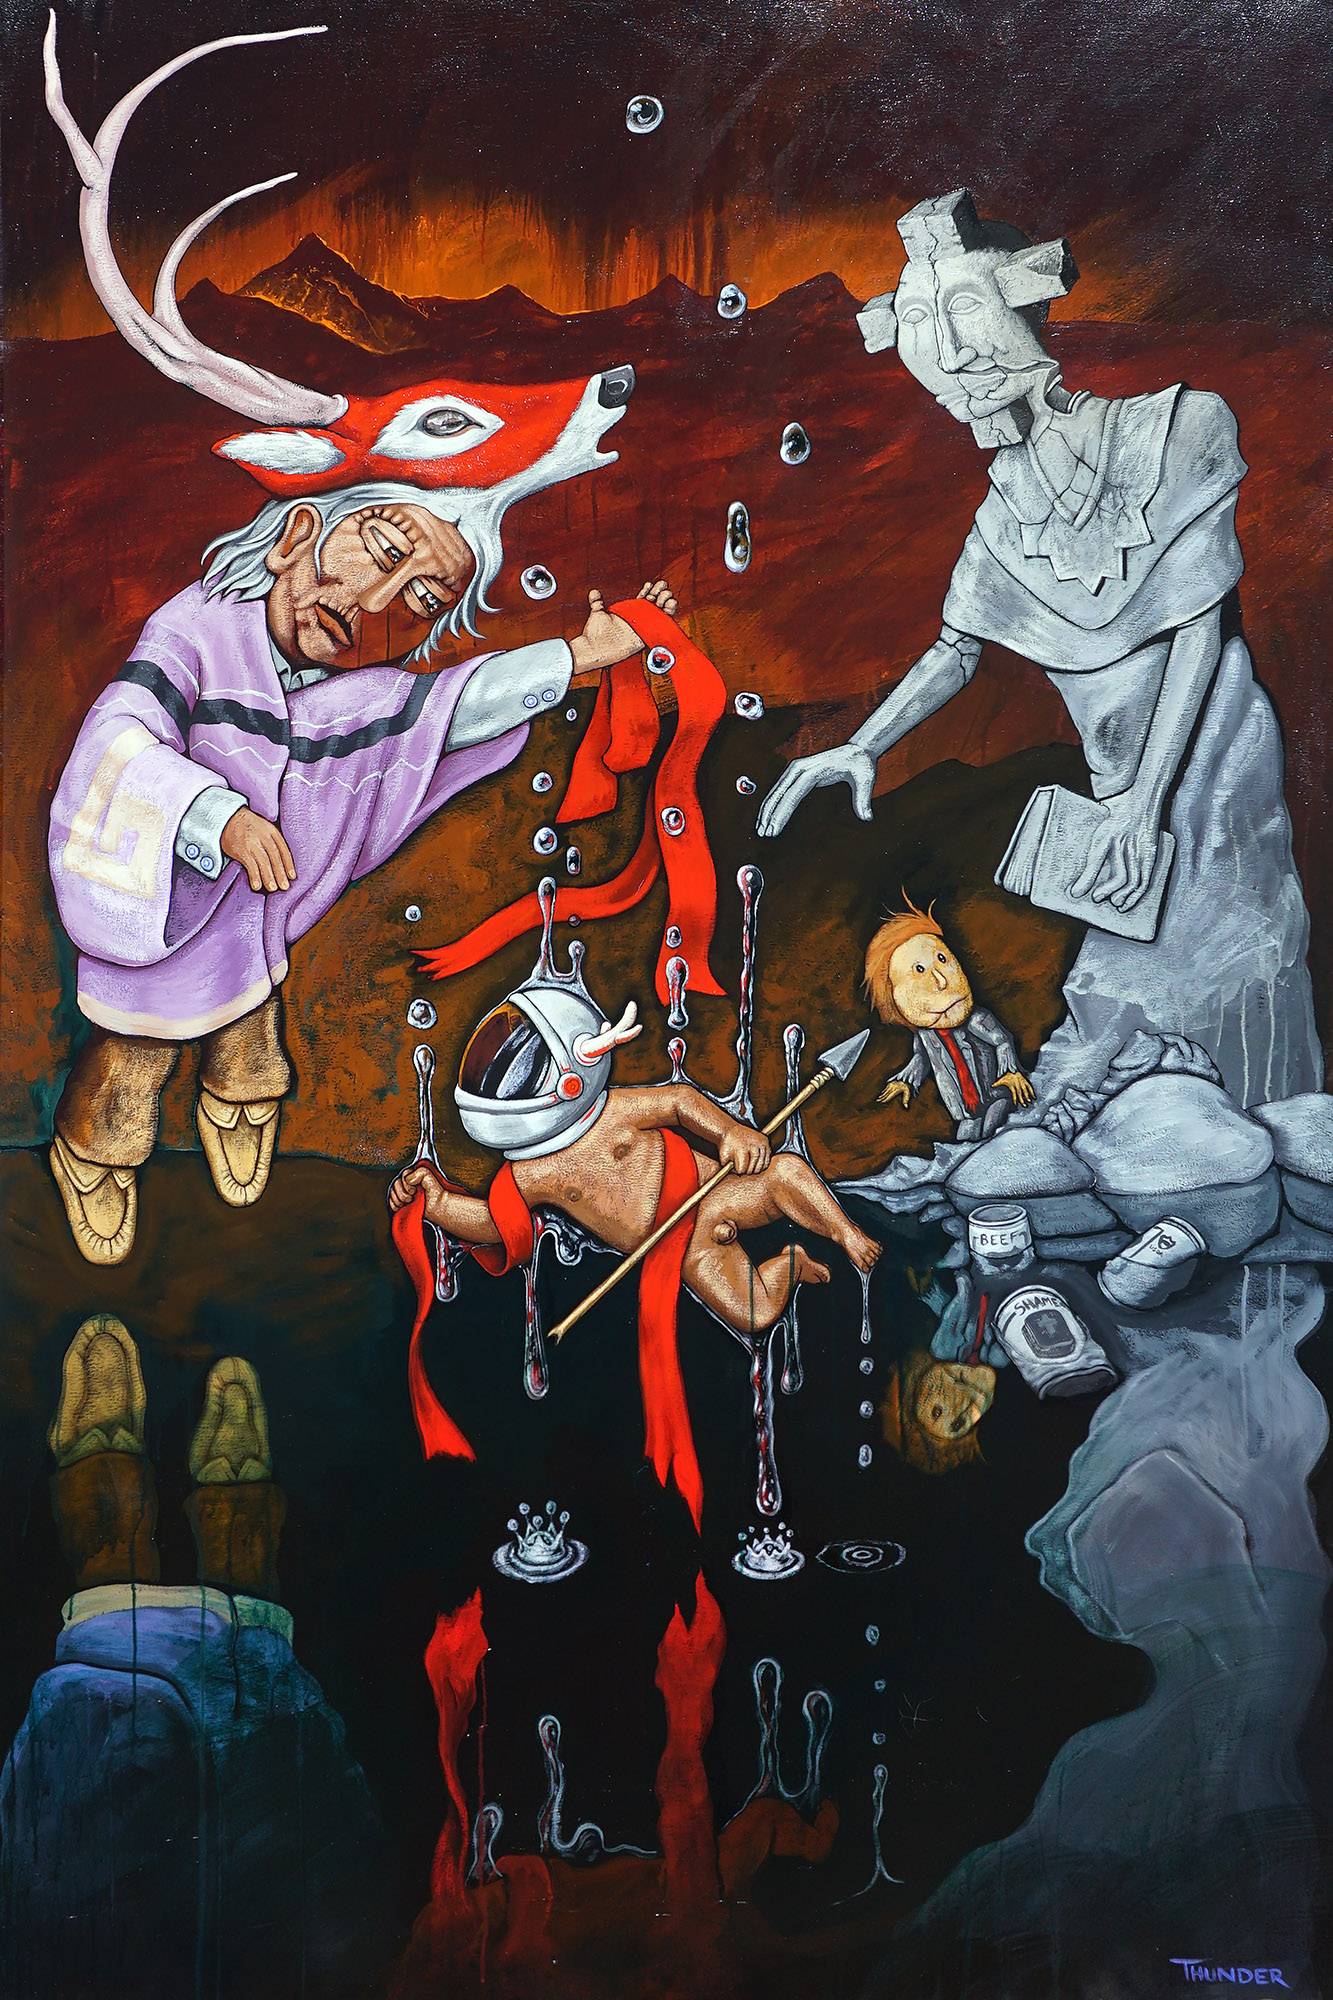 Acrylic painting by Jason Wesaw depicting four figures in a surreal landscape; an indigenous man wearing a fox/deer hybrid head dress, a nude male figure wearing a helmet, a politician figure, and an indigenous statue.